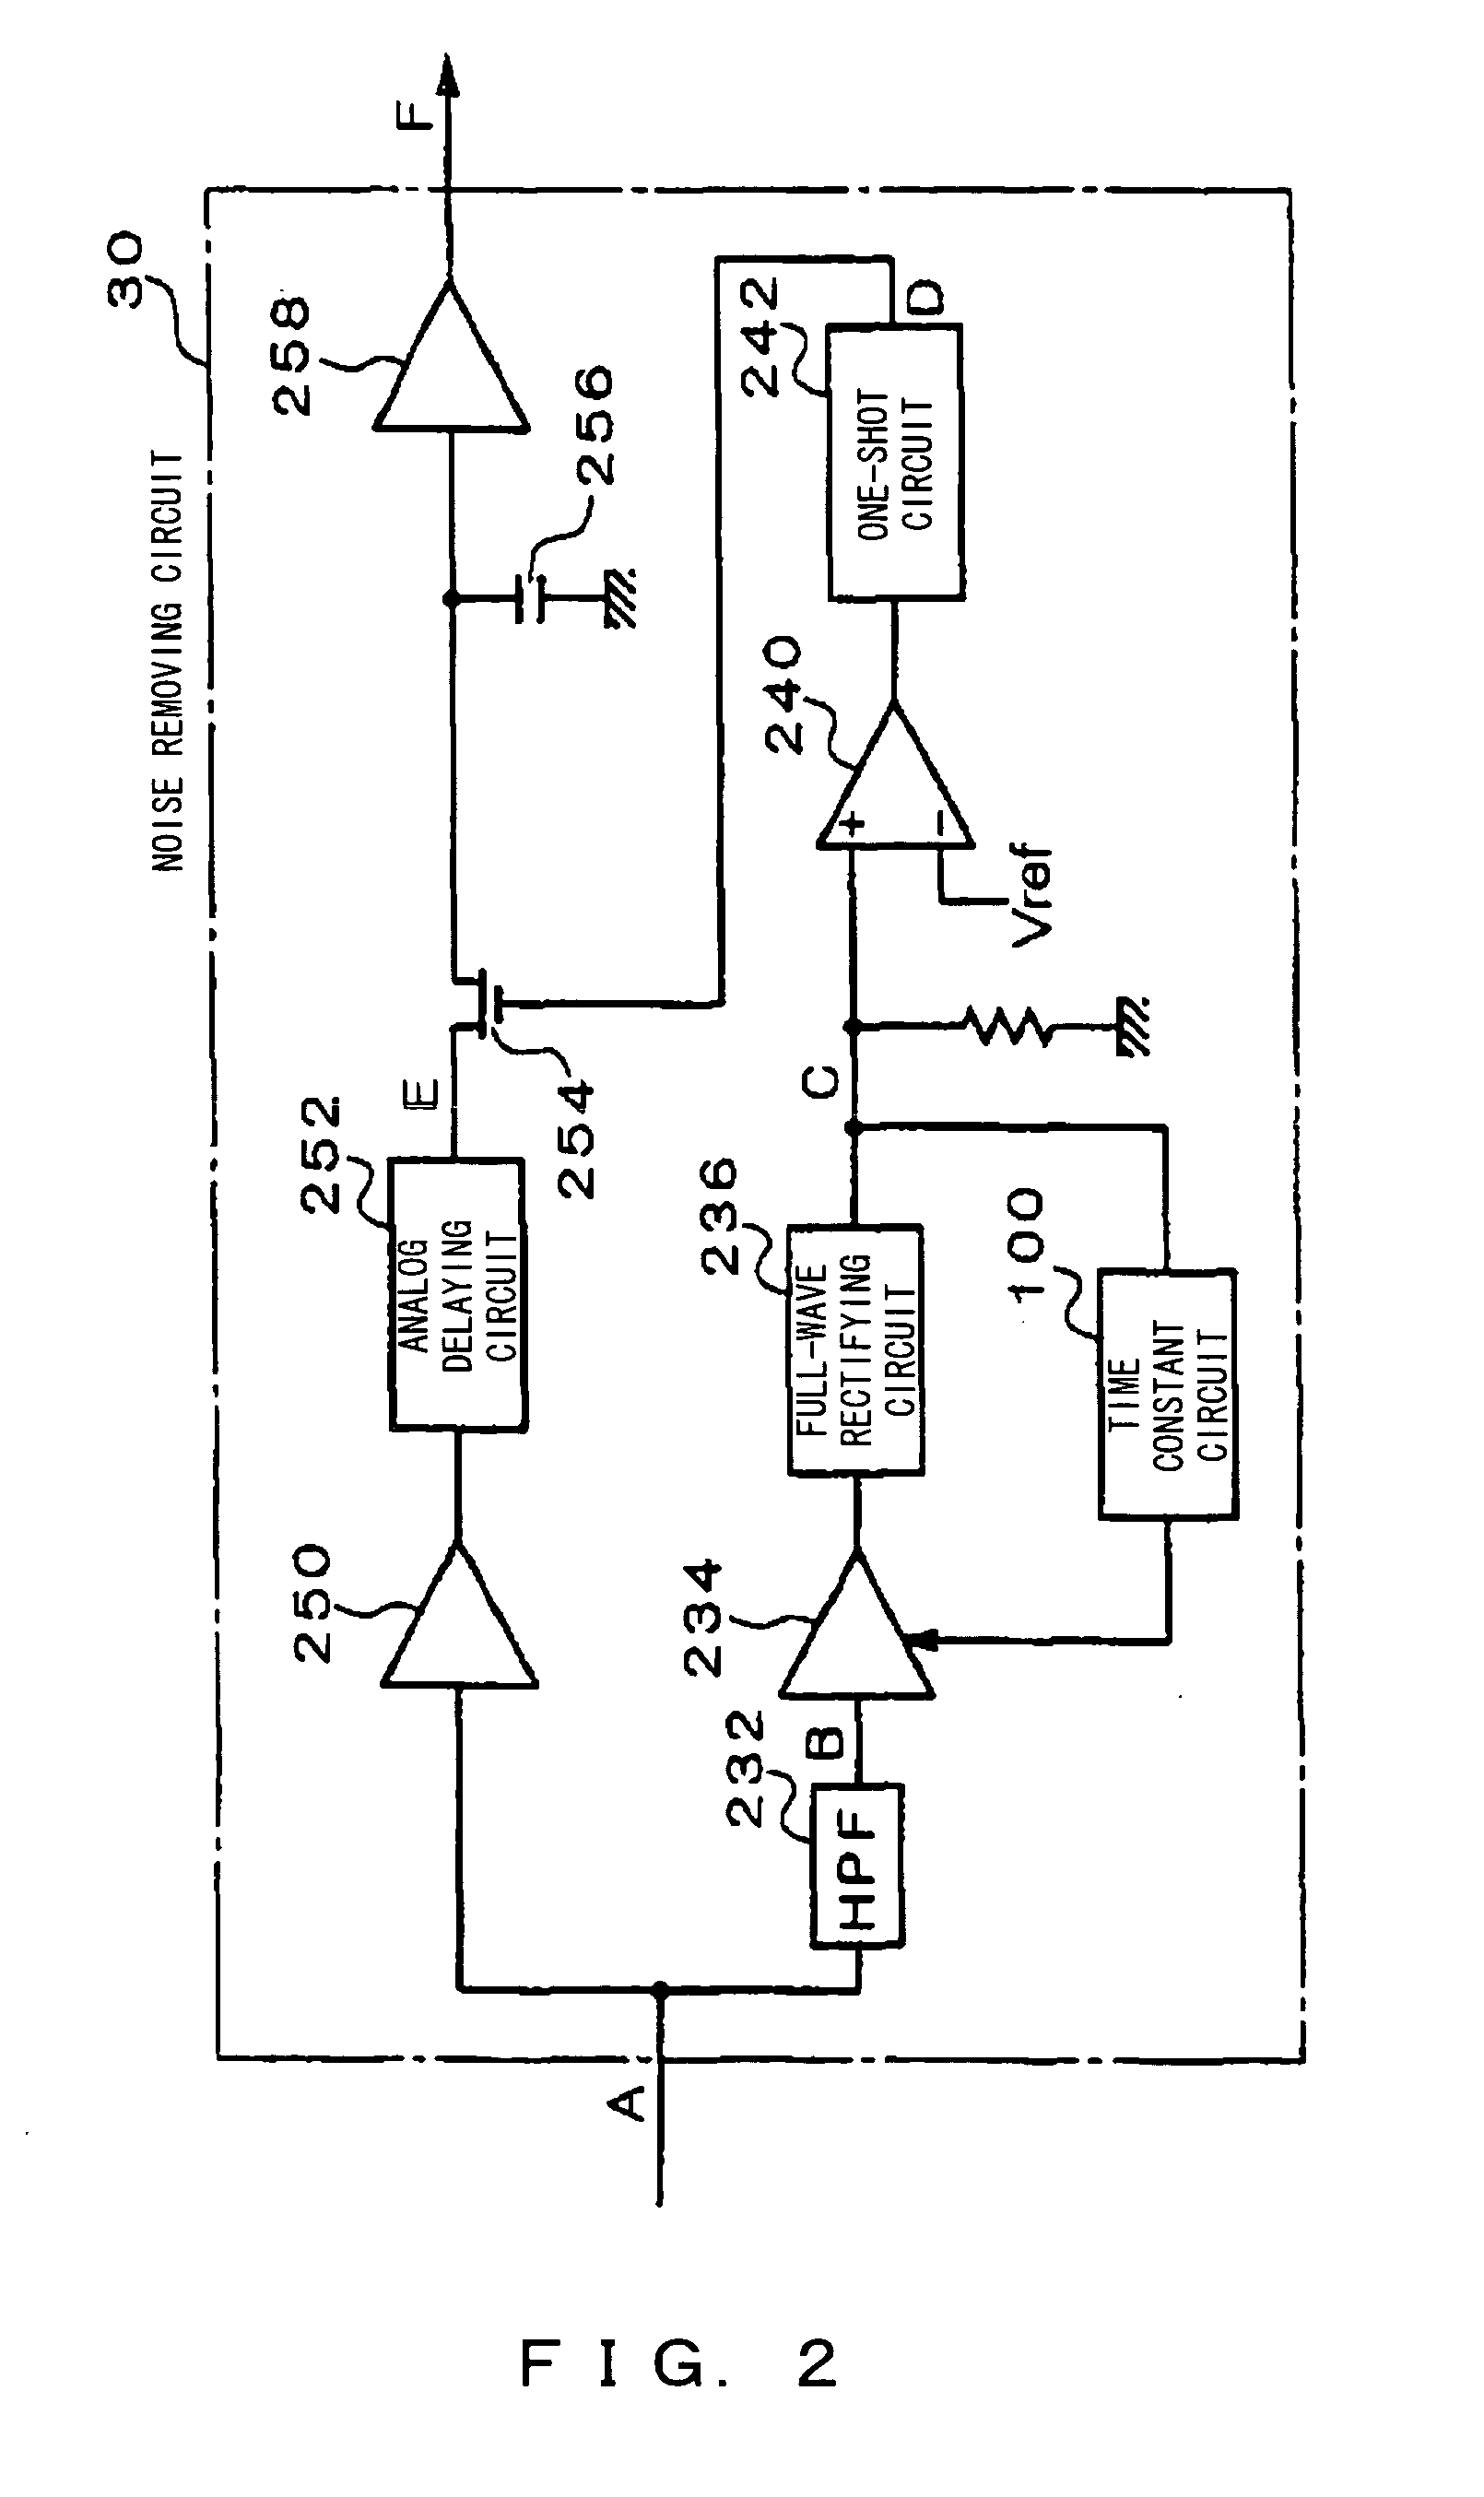 Noise filter circuit